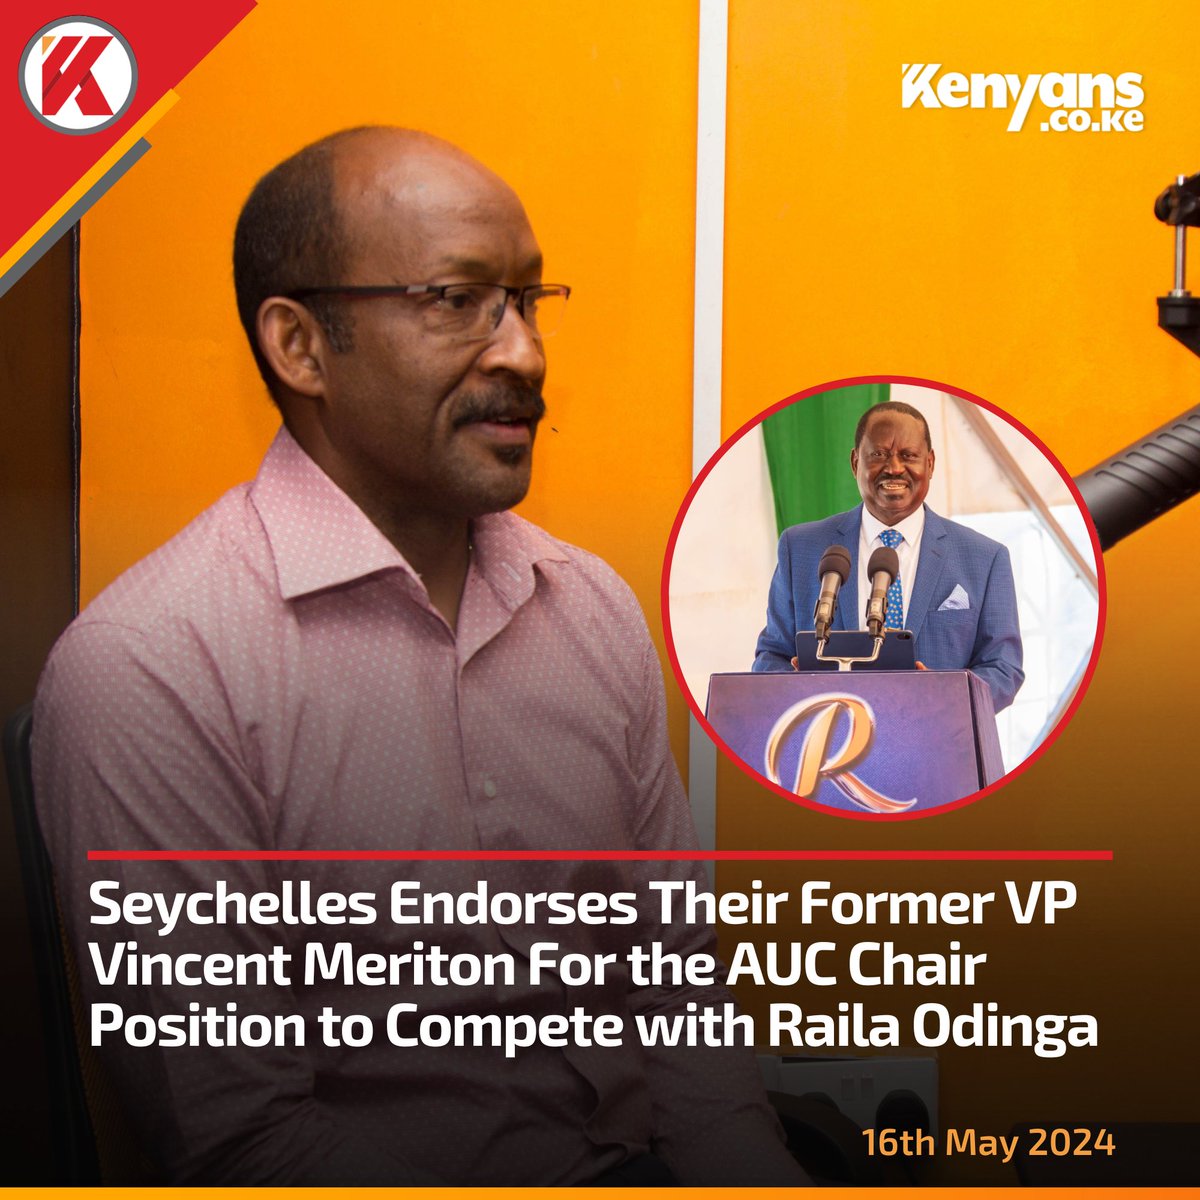 Seychelles endorses their former VP Vincent Meriton for the AUC Chair position to compete with Raila Odinga